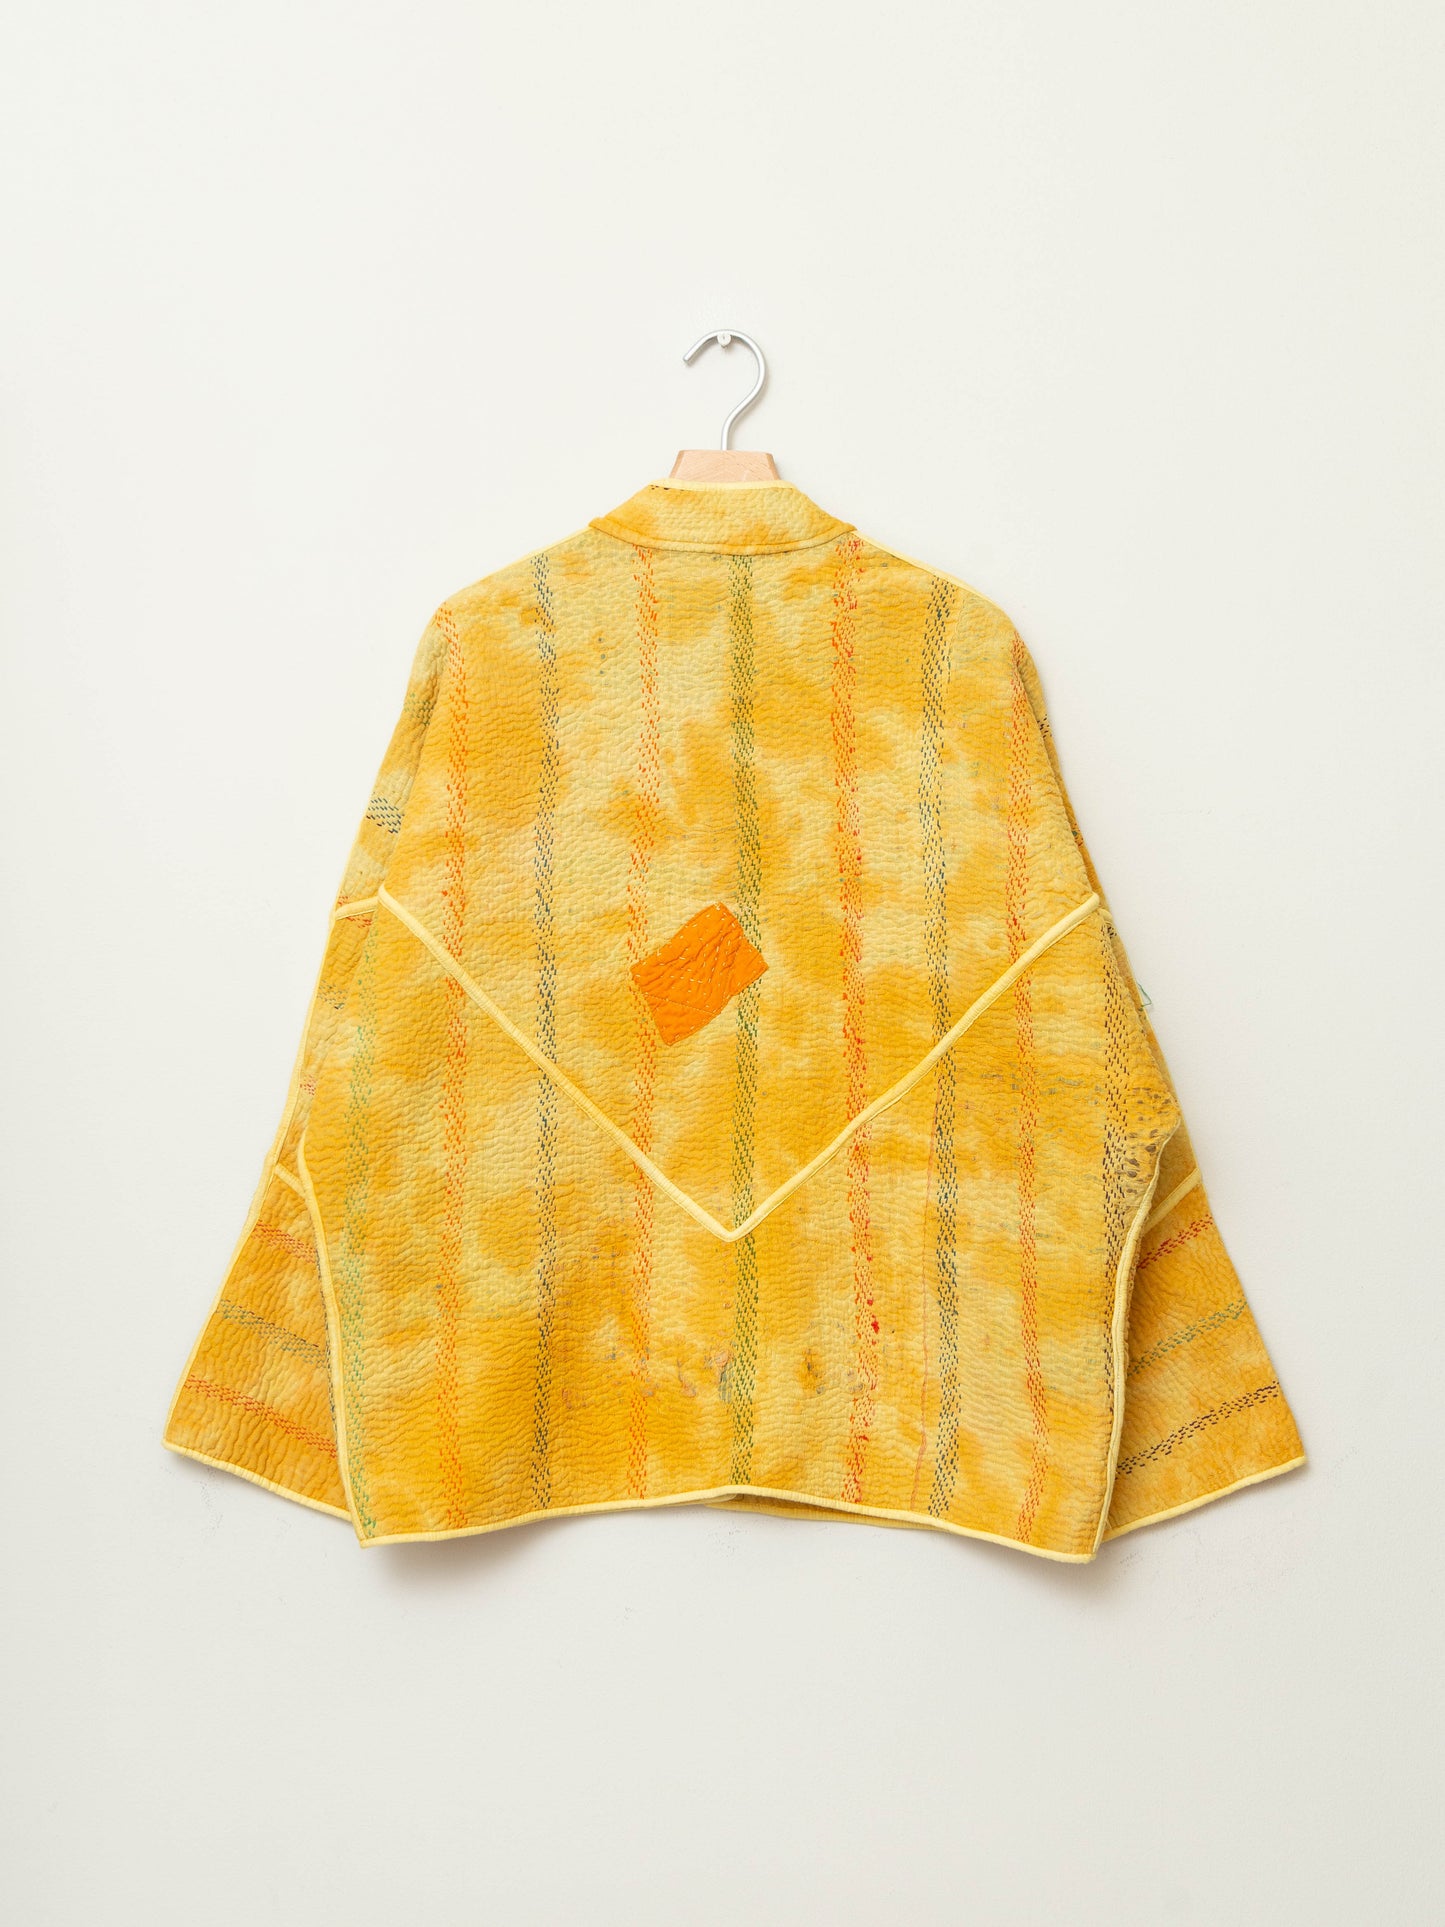 The Ladhiya Quilted Plant Dyed Kantha Jacket